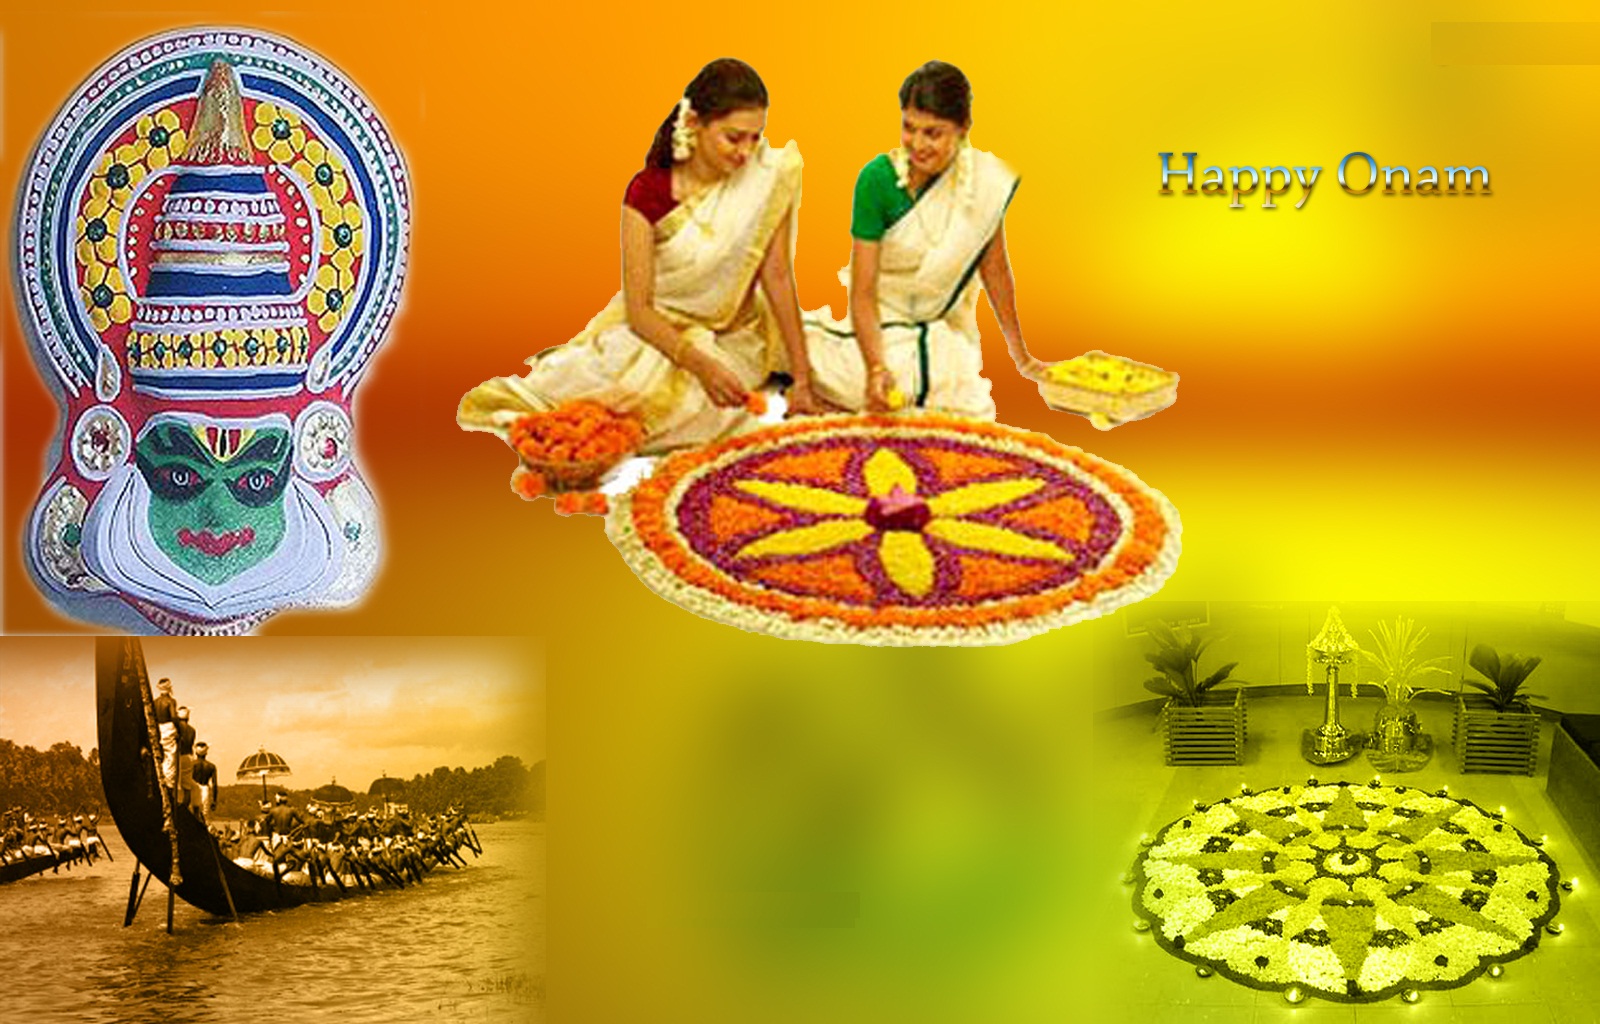 Happy Onam 2015 Festival Images Pictures Wallpapers Photos Free Download - Onam 2015